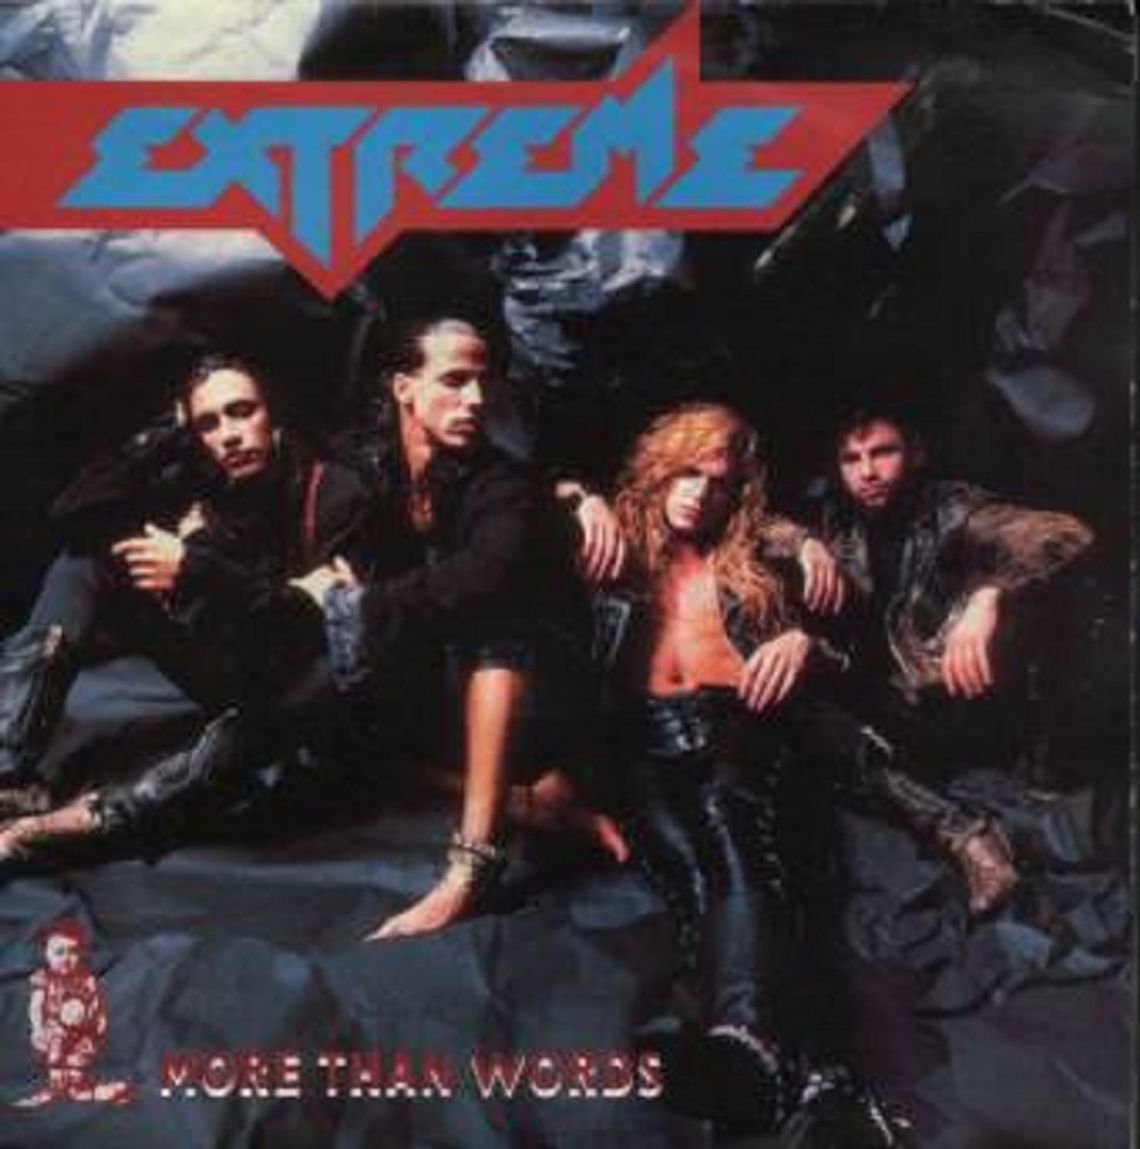 EXTREME "More than words"